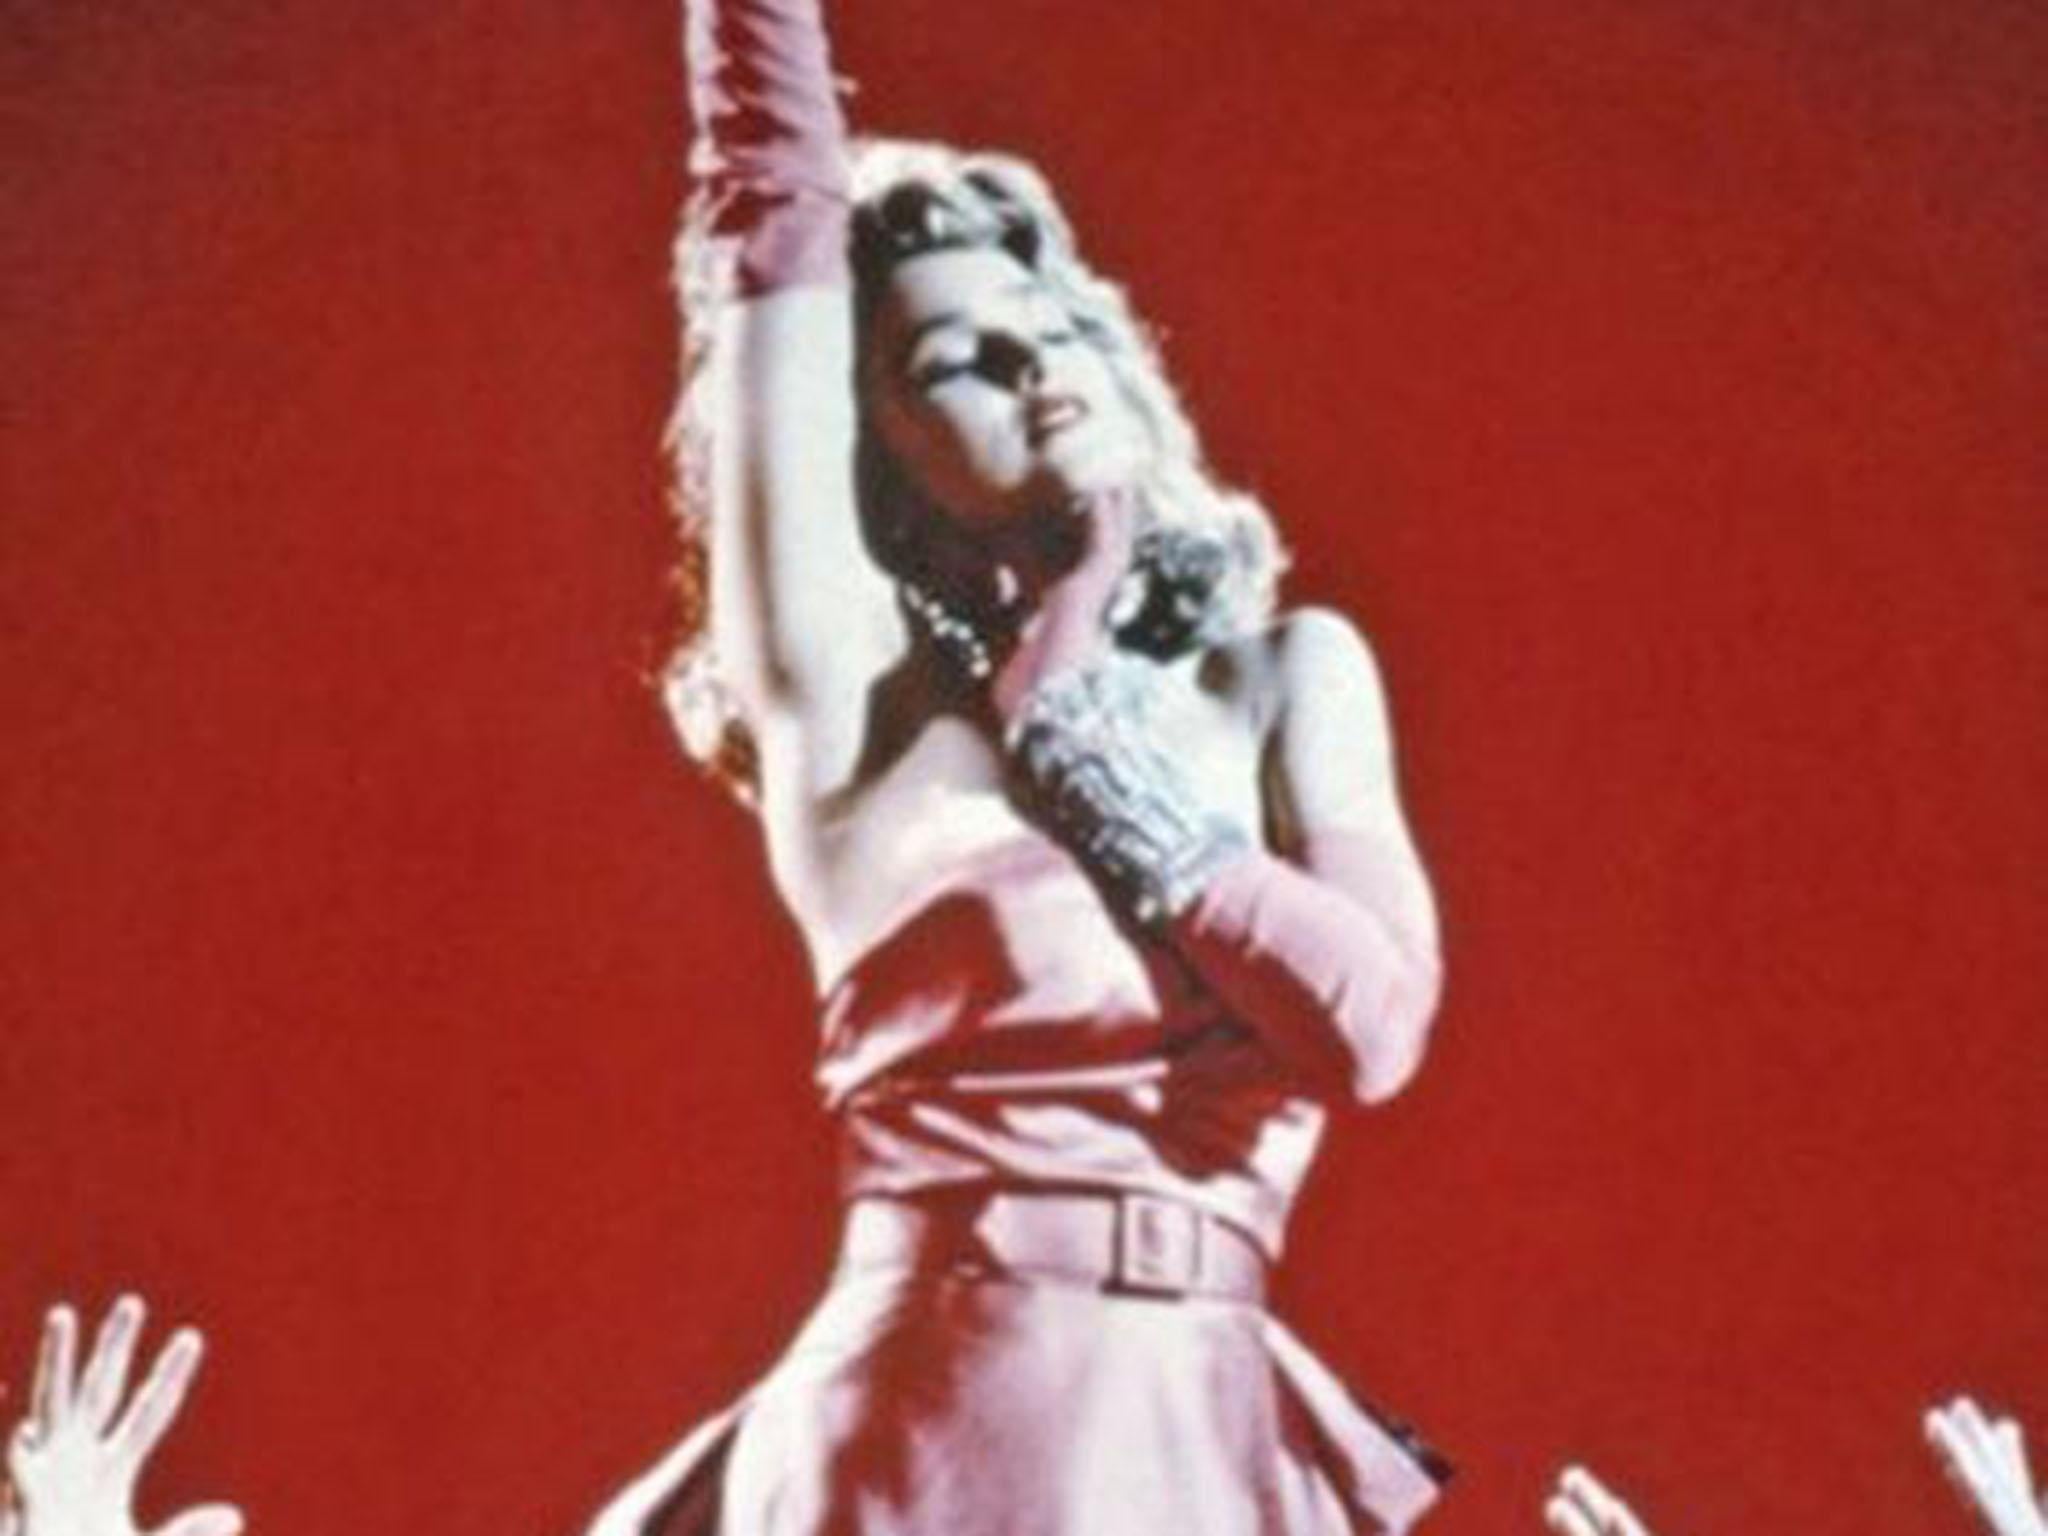 Madonna has been known as a 'Material Girl' since her 1985 hit music video